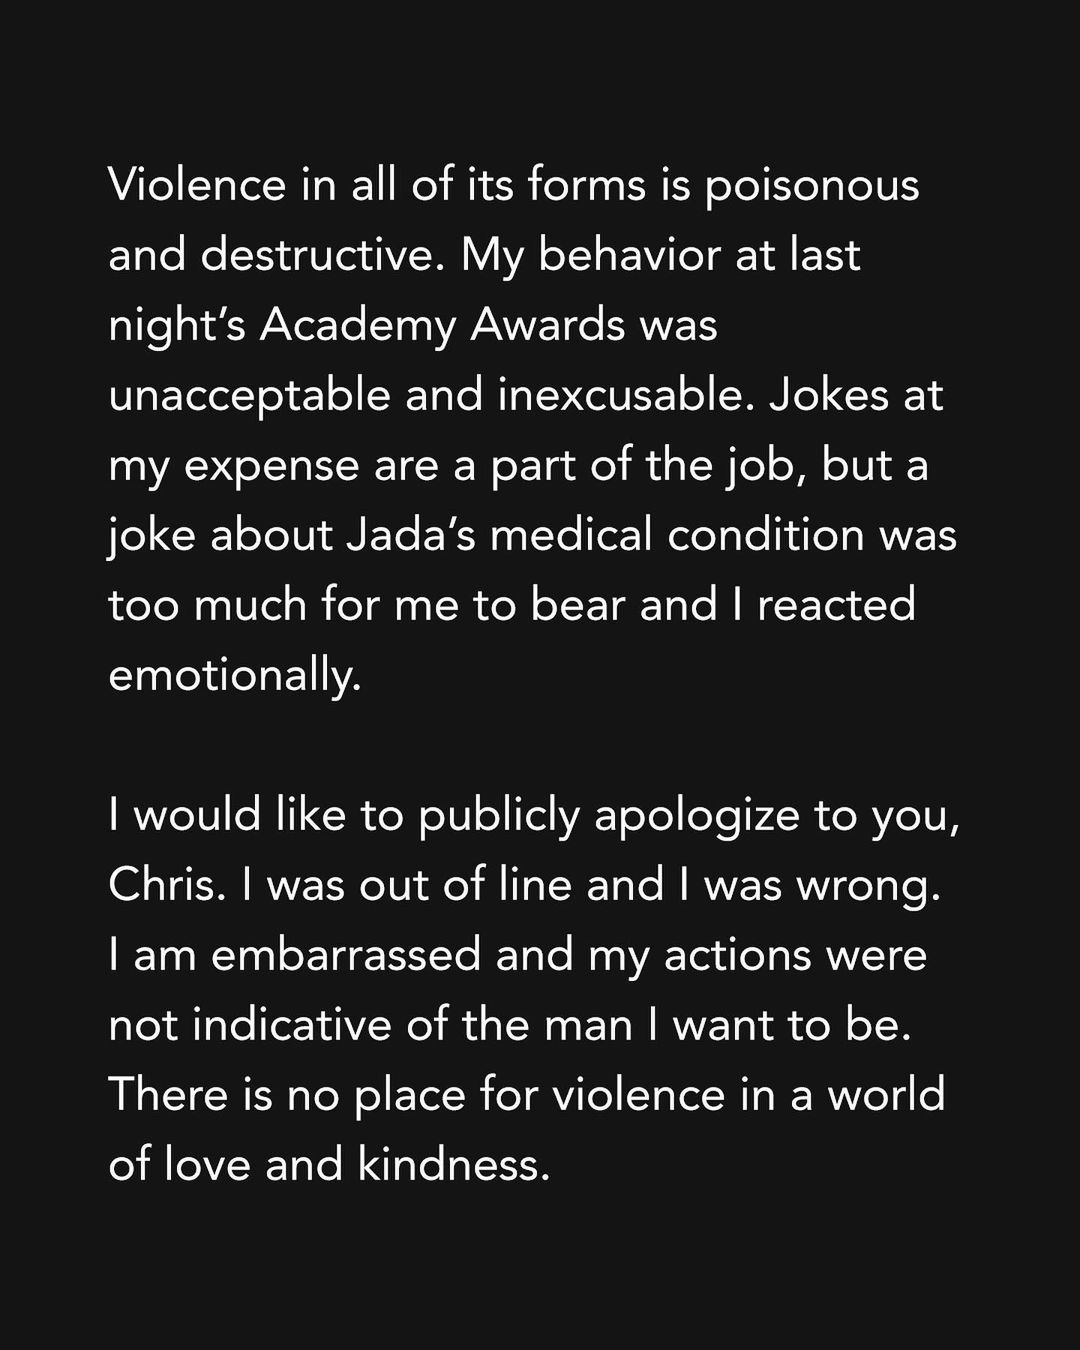 Violence in all of its forms is poisonous and destructive. My behavior at last night’s Academy Awards was unacceptable and inexcusable. Jokes at my expense are a part of the job, but a joke about Jada’s medical condition was too much for me to bear and I reacted emotionally.I would like to publicly apologize to you, Chris. I was out of line and I was wrong. I am embarrassed and my actions were not indicative of the man I want to be. There is no place for violence in a world of love and kindness.   I would also like to apologize to the Academy, the producers of the show, all the attendees and everyone watching around the world. I would like to apologize to the Williams Family and my King Richard Family. I deeply regret that my behavior has stained what has been an otherwise gorgeous journey for all of us. I am a work in progress.Sincerely,Will